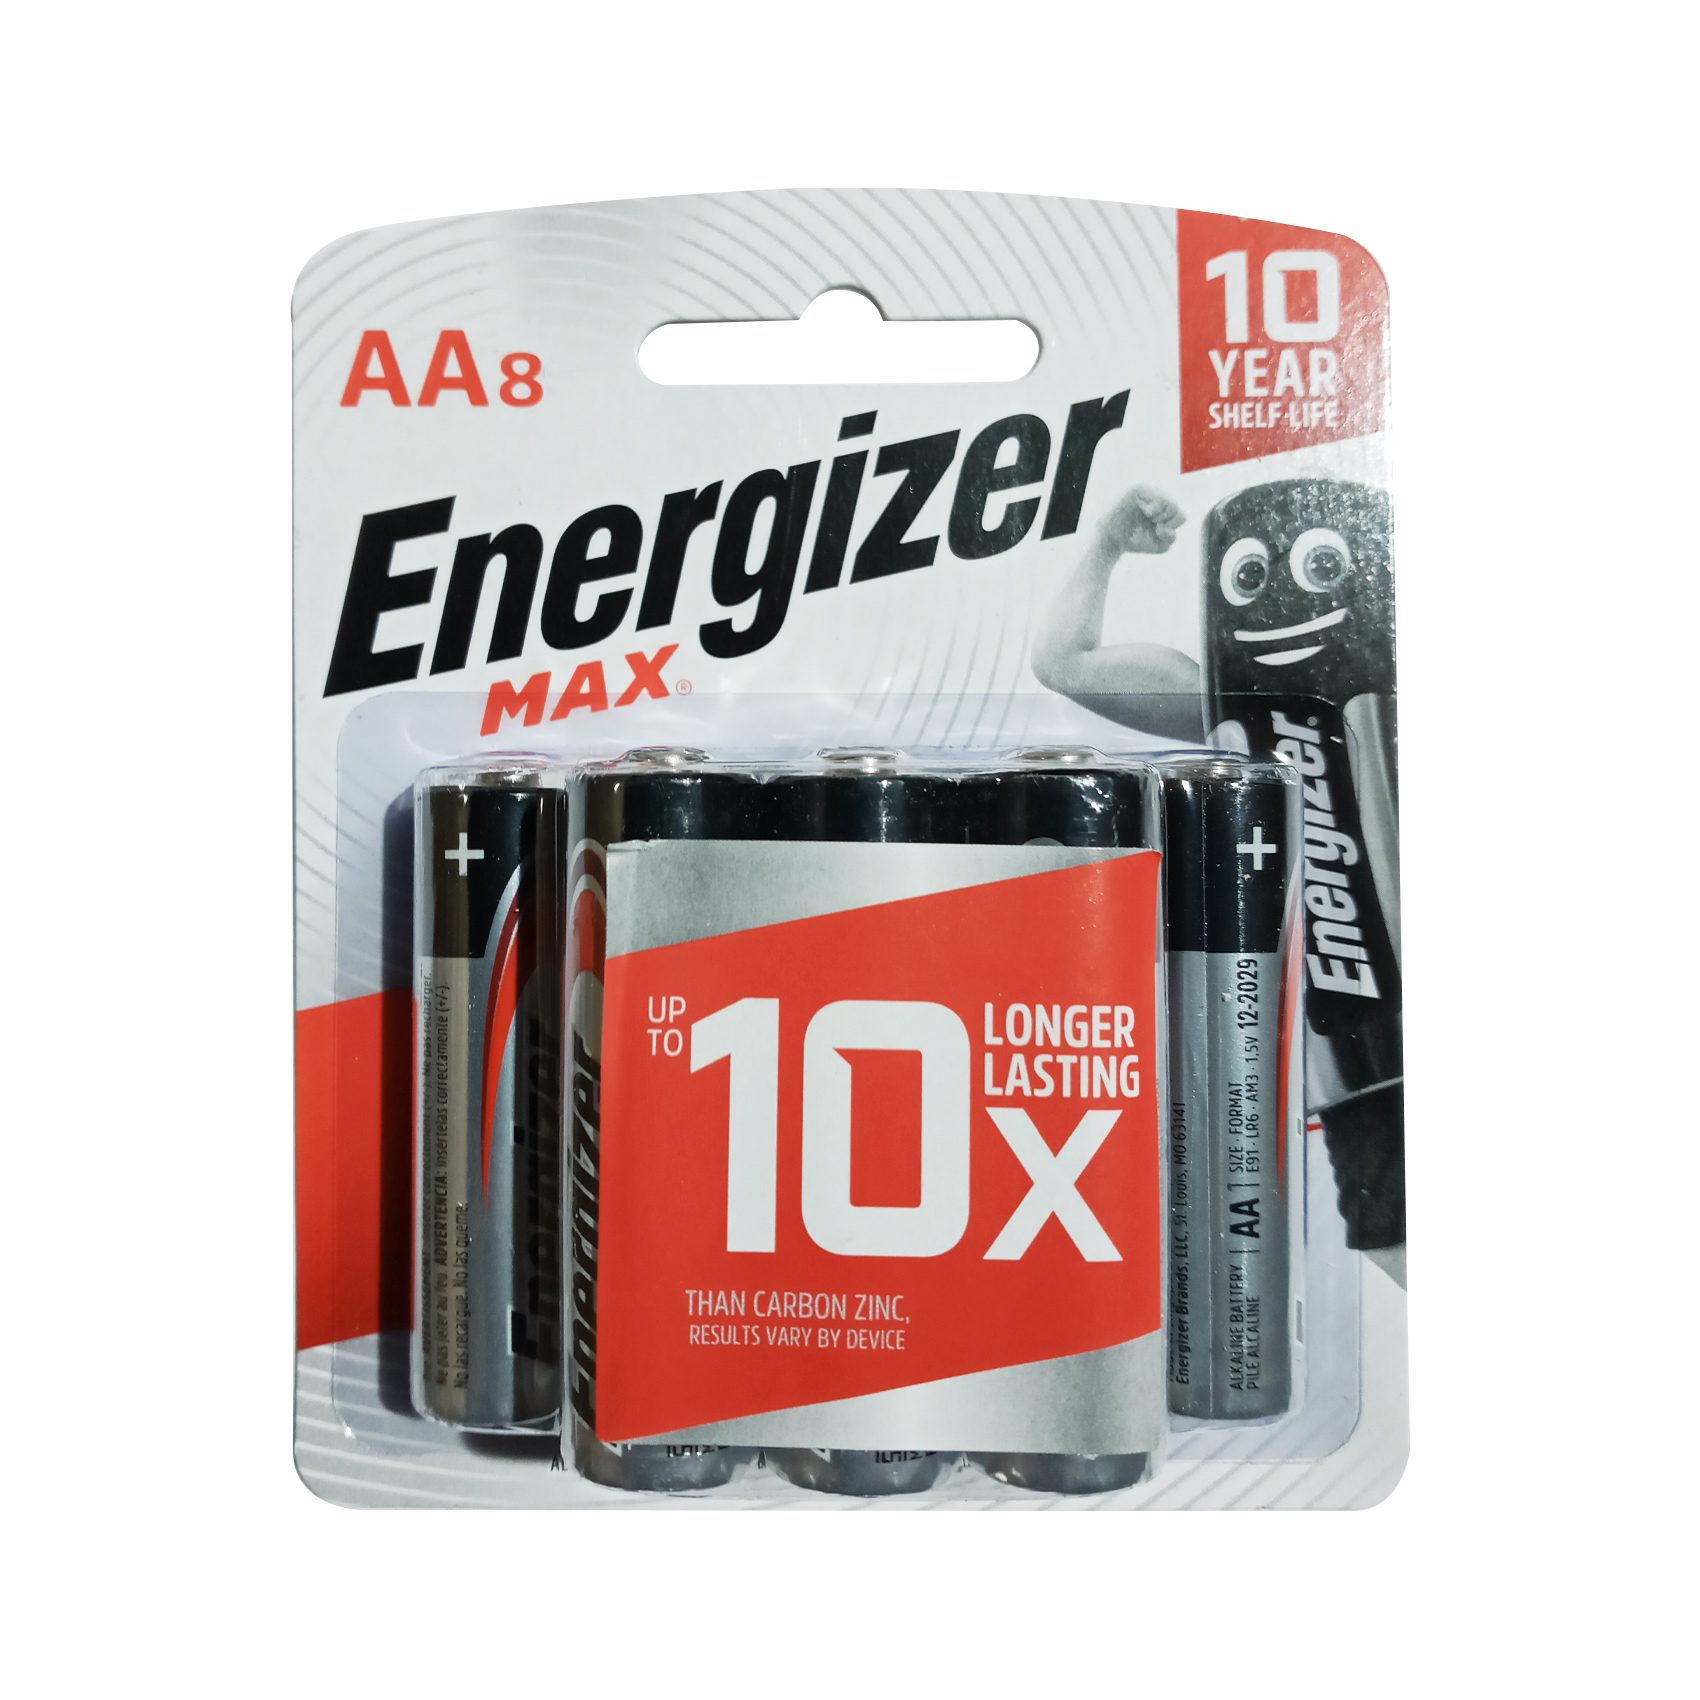 Energizer Max 1 5v Alkaline Battery Aa E91 Bp8 Pack Of 8 Wholesale